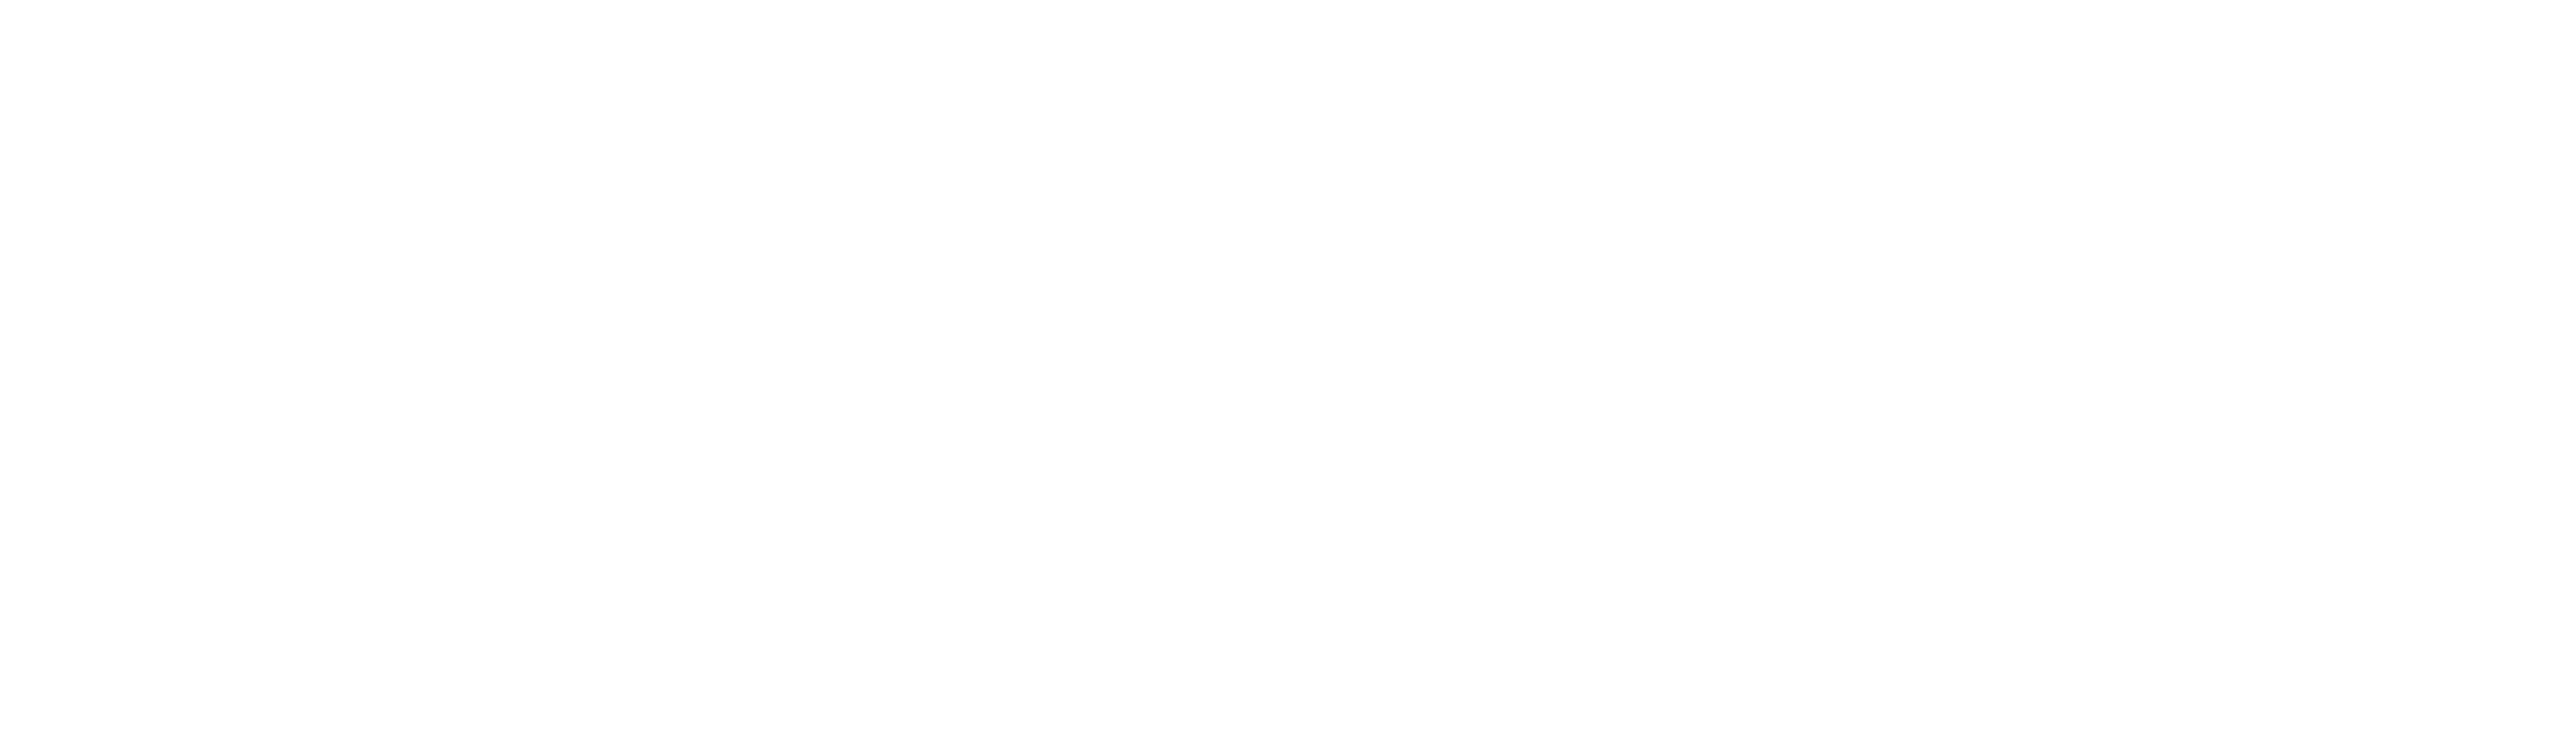 Soteria Networks